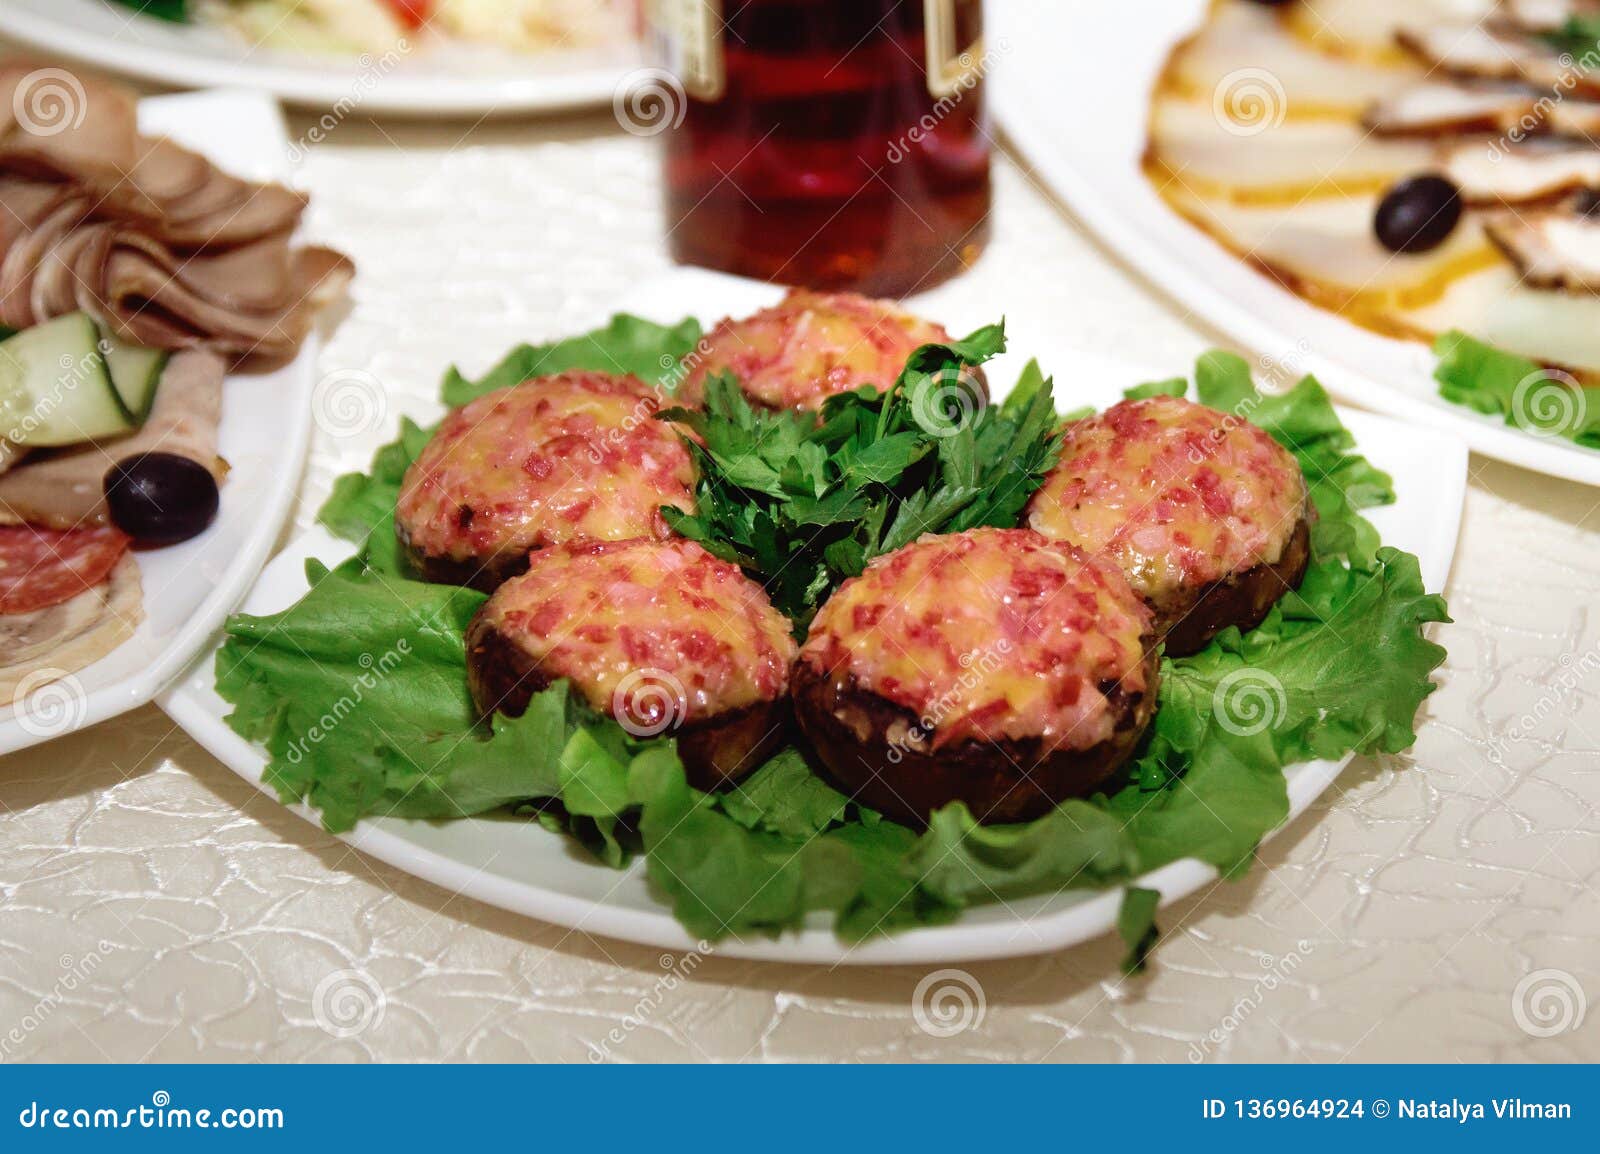 Sandwiches with Meat Pate and Herbs Lie on a Dish Stock Photo - Image ...